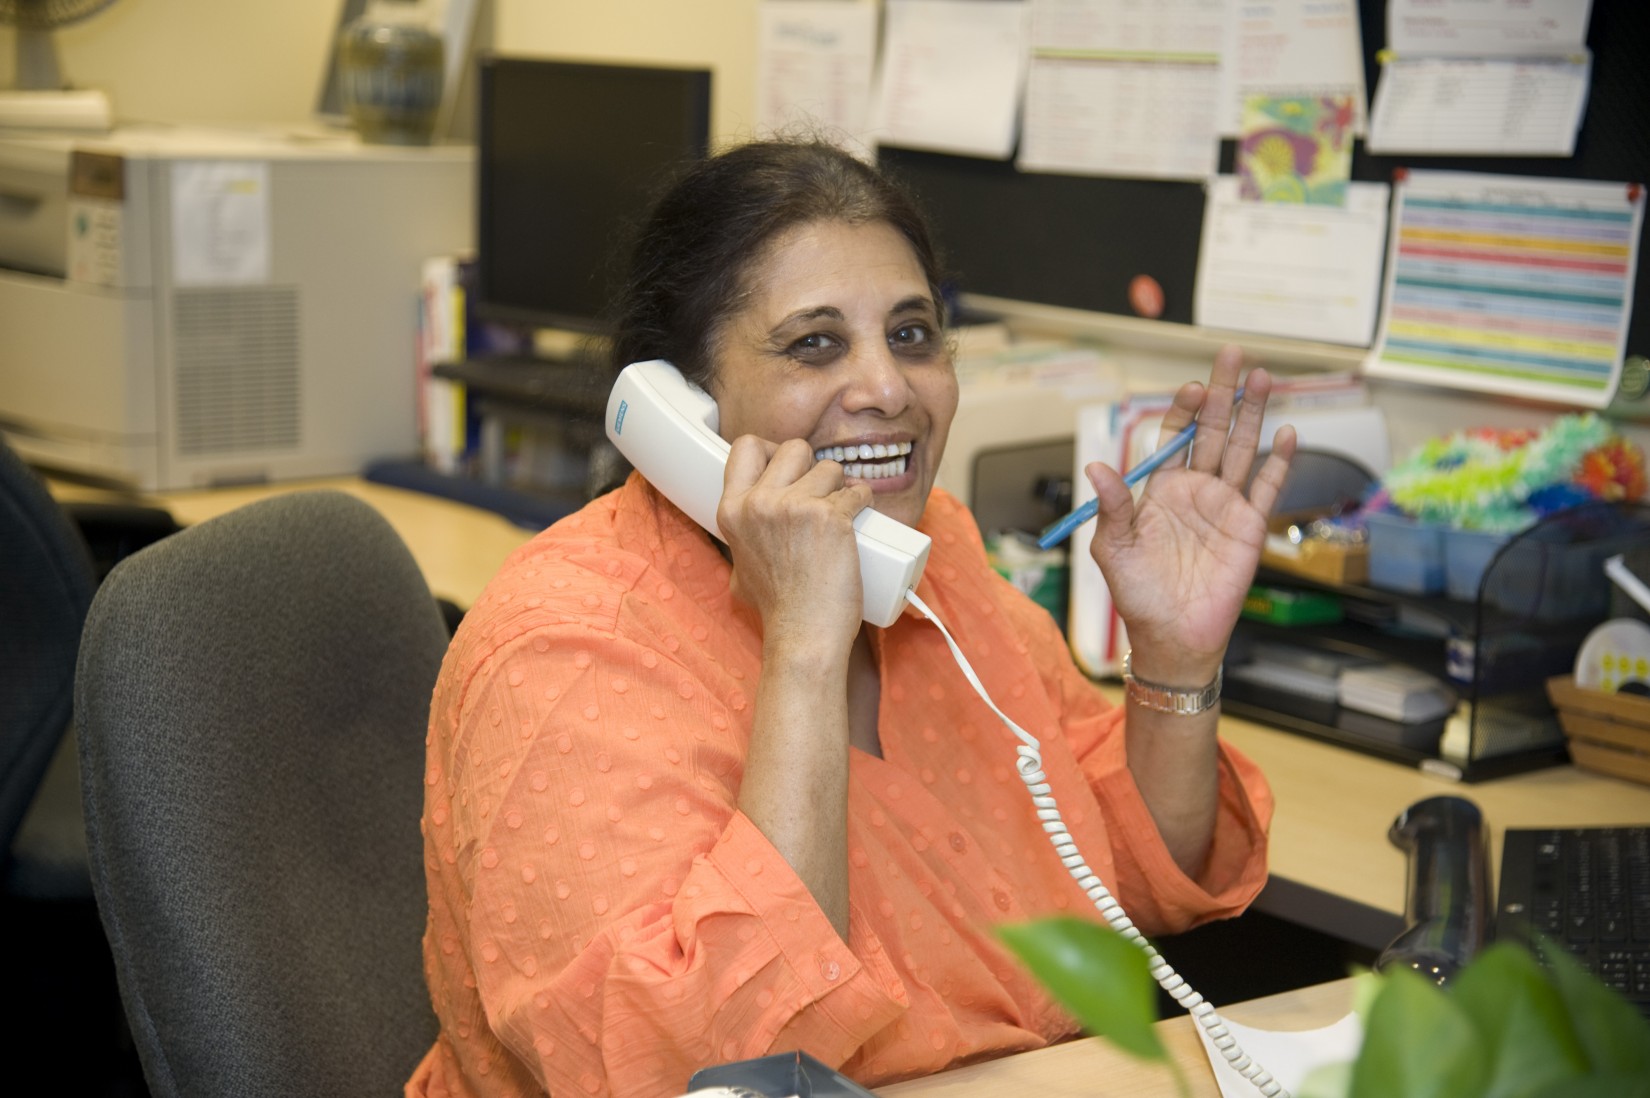 Rekha Swami, Administrative Assistant for the Division of Sciences